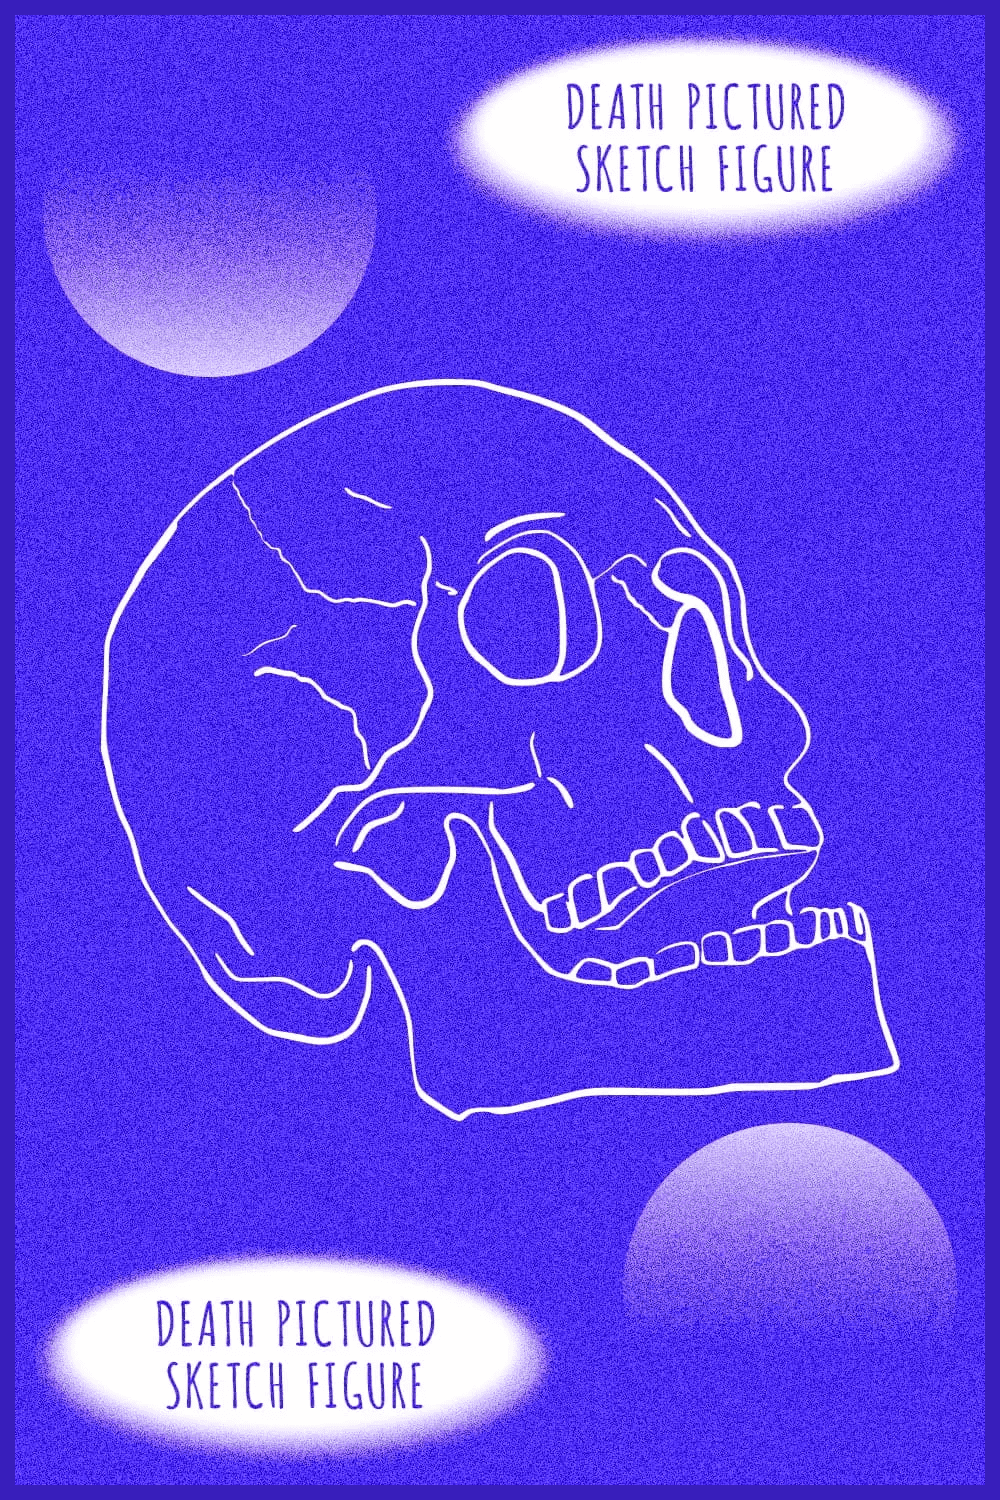 Sketch of a white skull on a blue background.